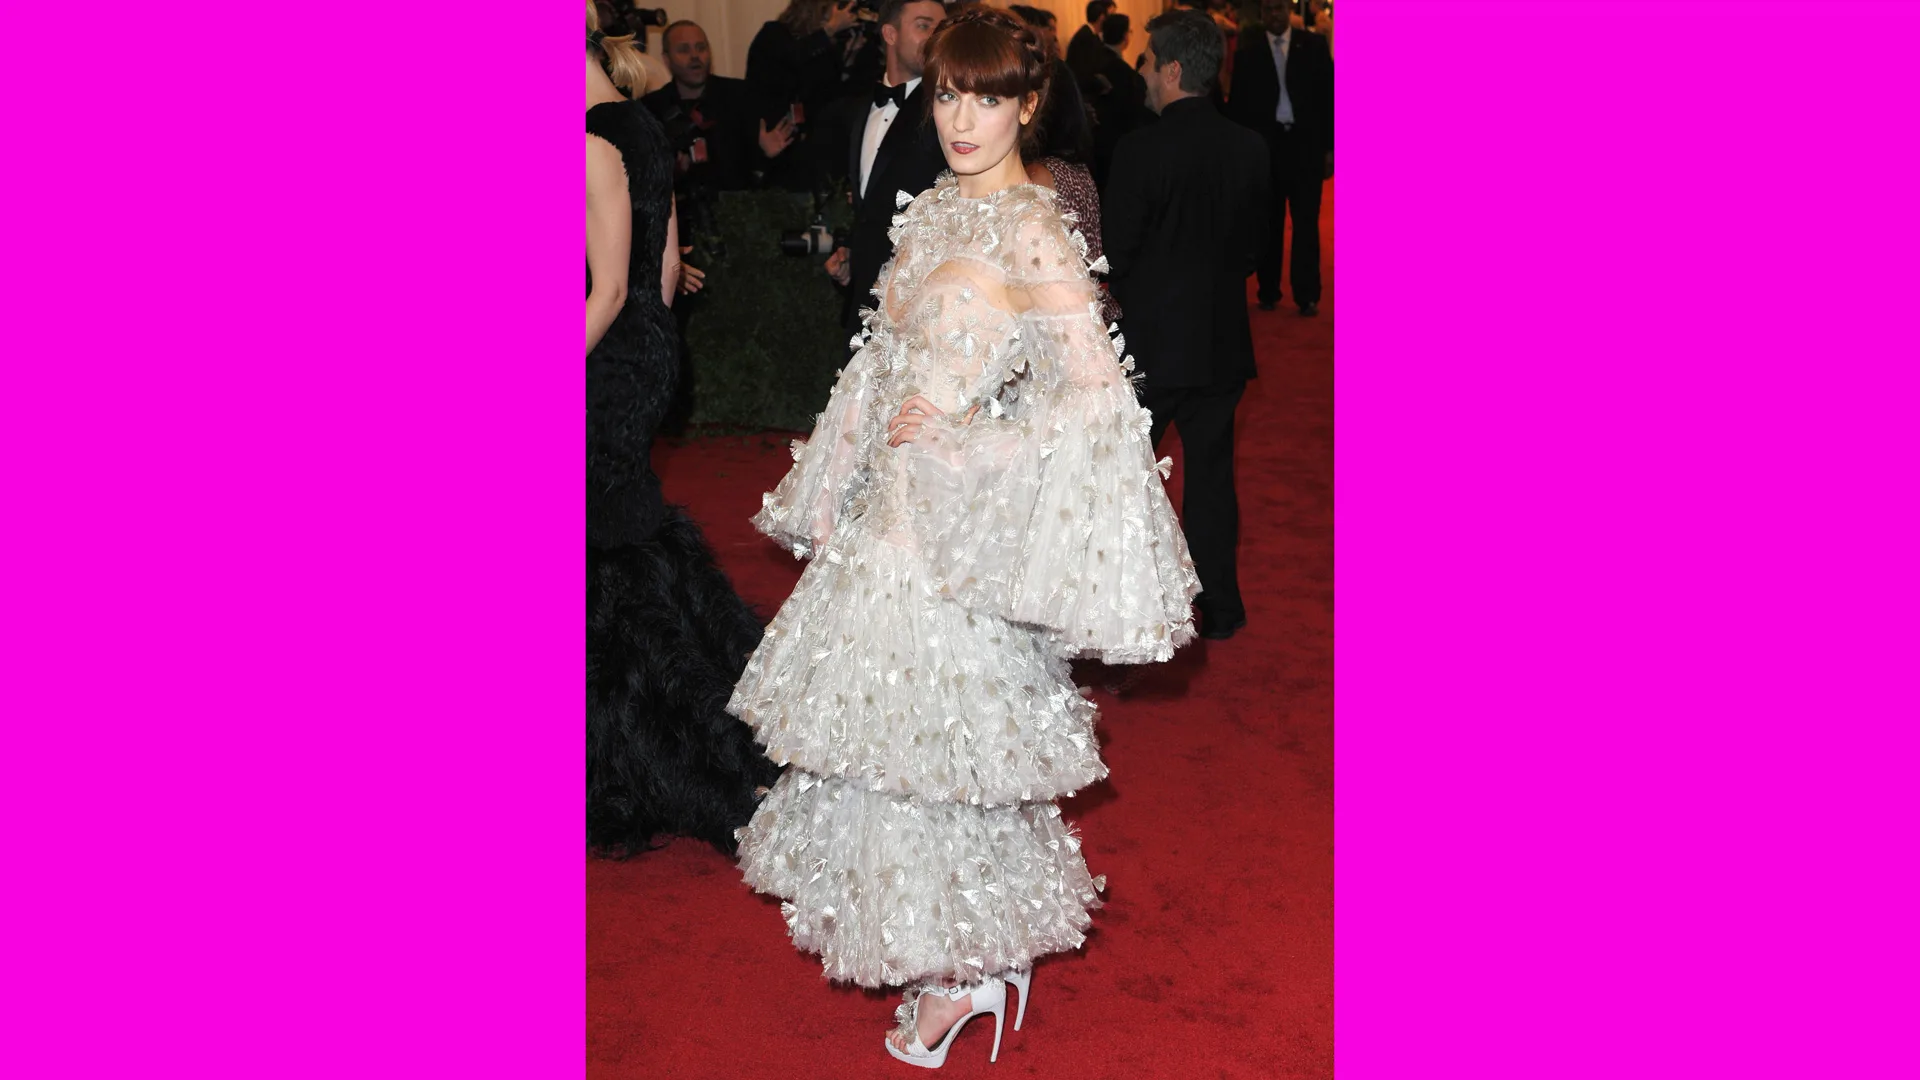 A photo of Florence Welch at the Met Gala wearing a white silver tiered ruffle dress